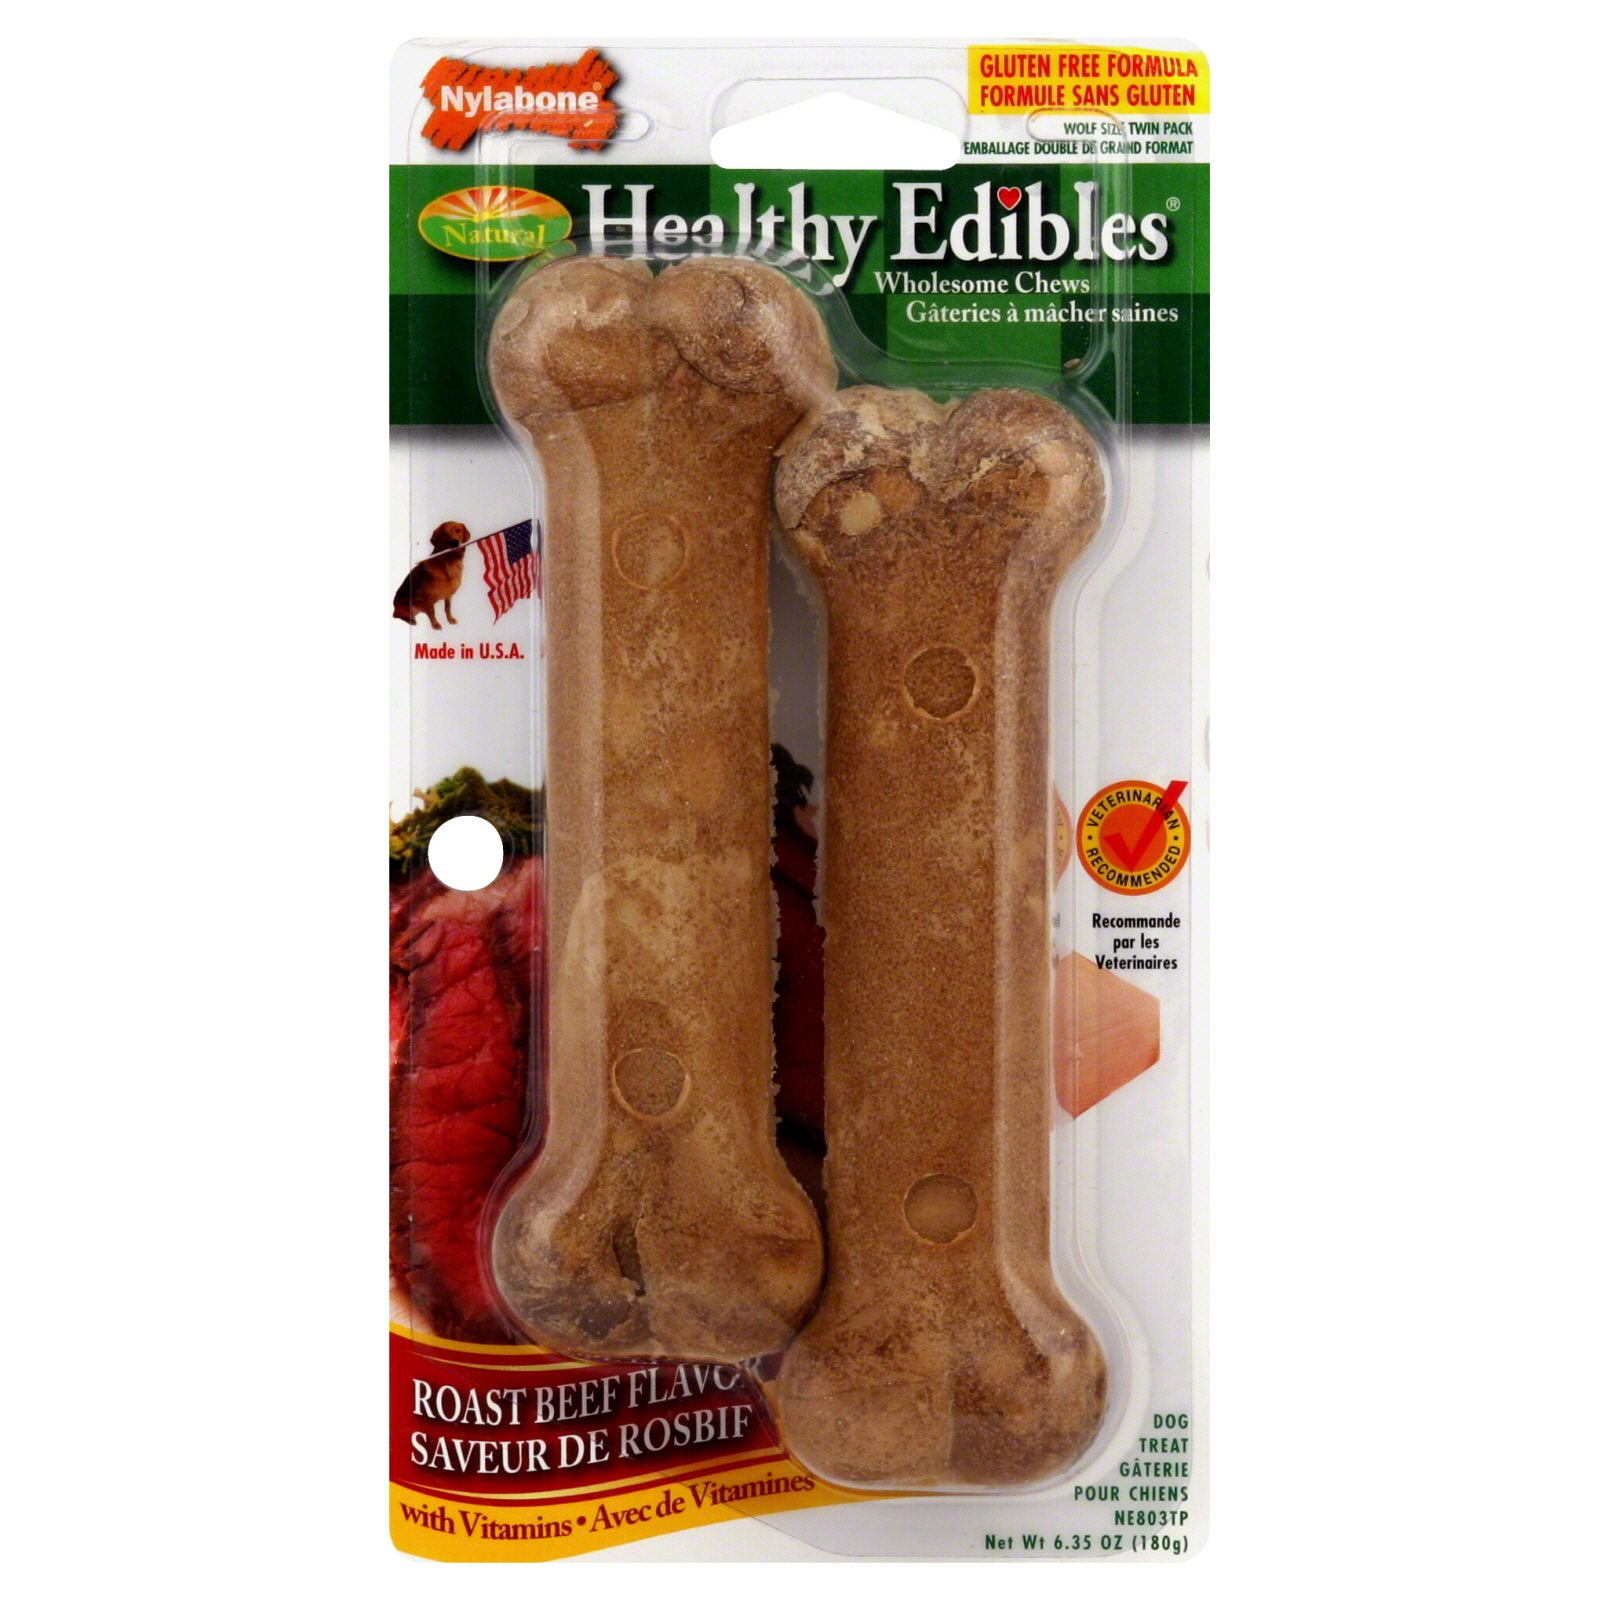 Nylabone Natural Healthy Edibles Wholesome Chews, Roast Beef Flavor, Wolf Size, Twin Pack, 2 treats [6.35 oz (180 g)